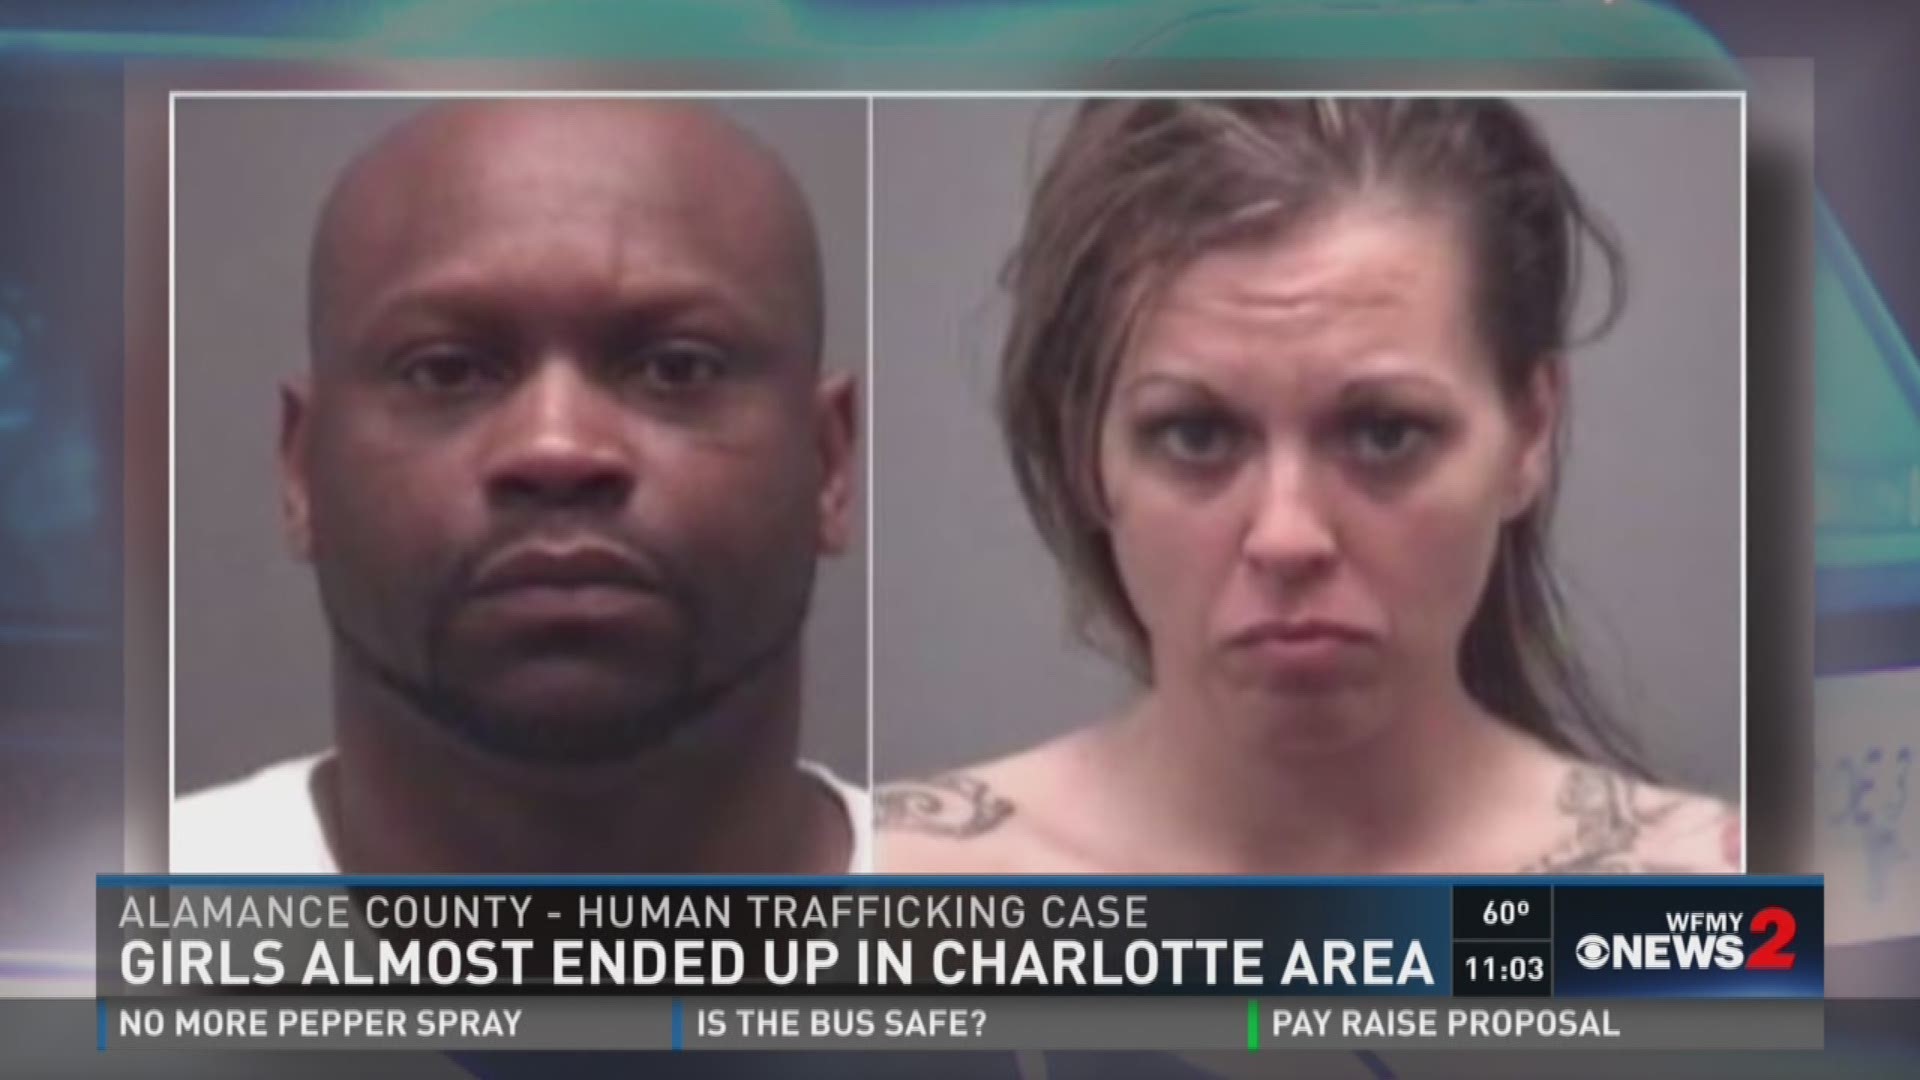 Girls Linked To Human Trafficking Case Almost Ended Up In Charlotte 0407